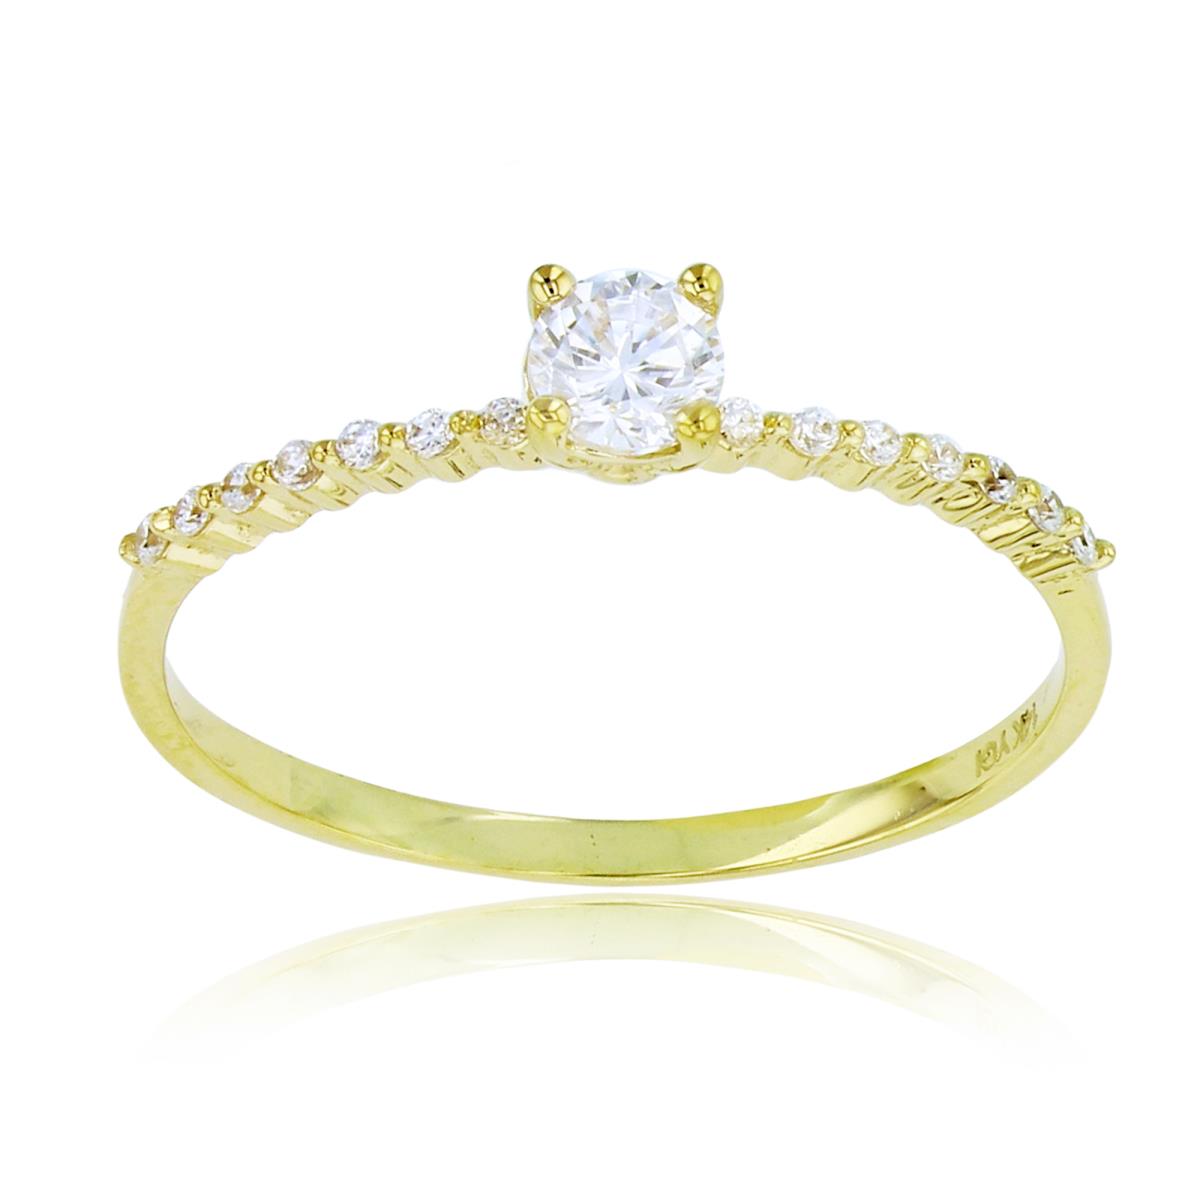 10K Yellow Gold 3.5mm Rnd CZ Center Engagement Ring